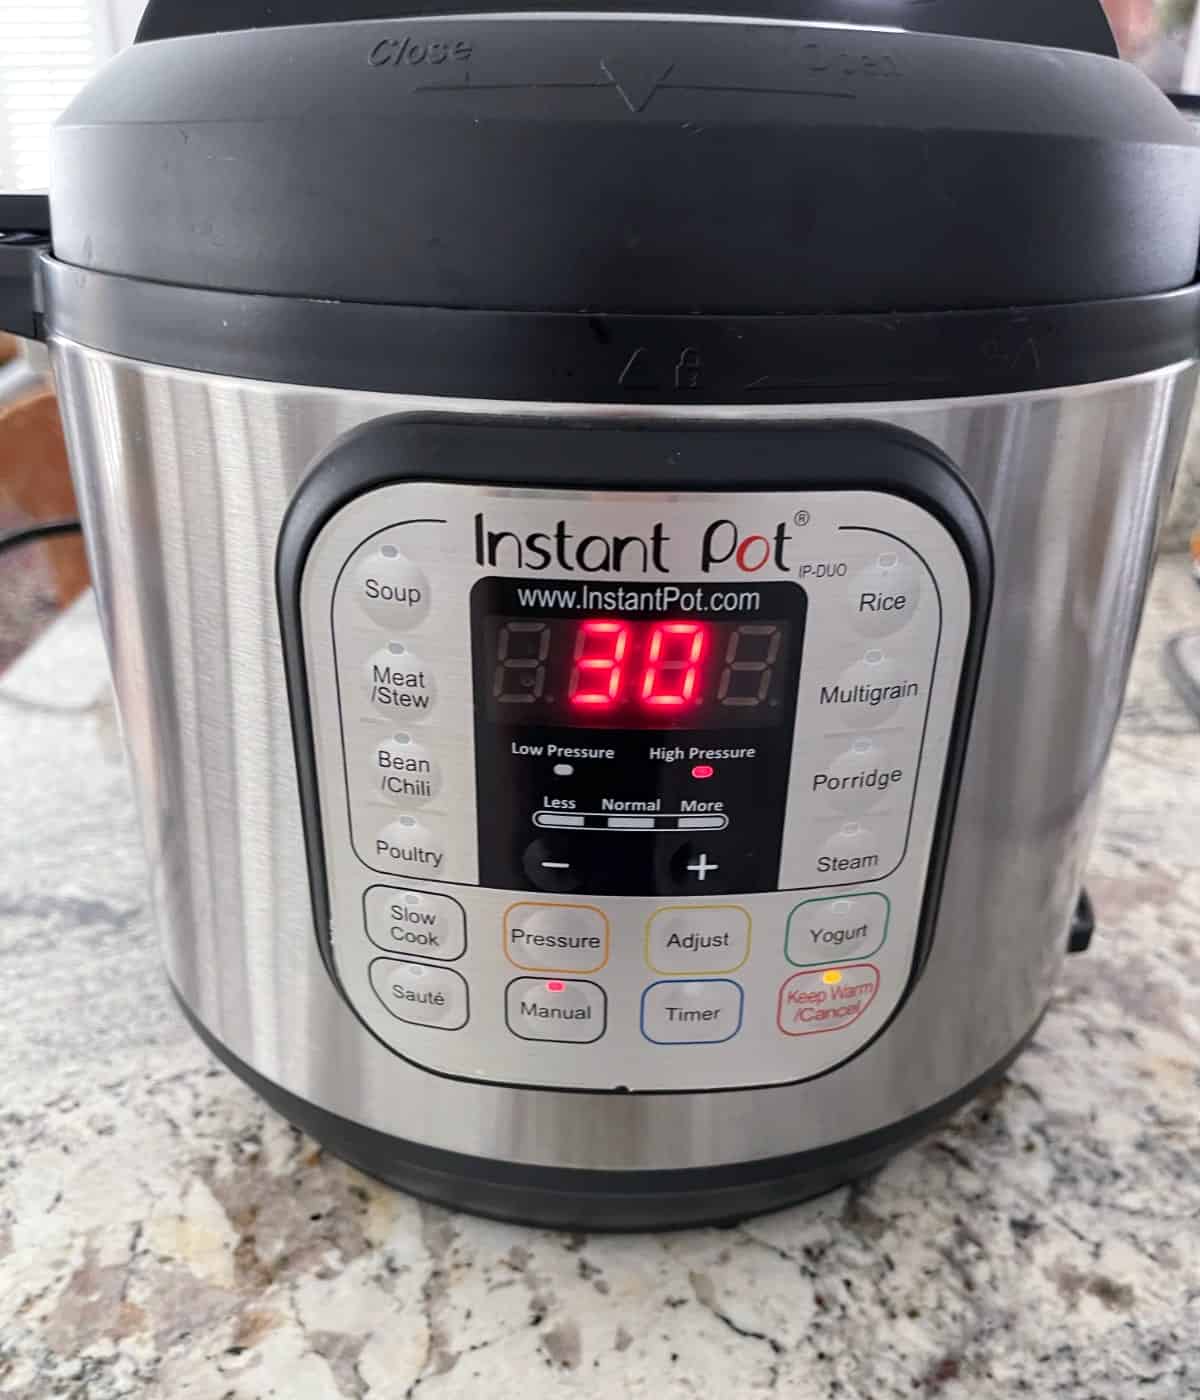 Covered Instant Pot set for 30 minutes on HIGH pressure.